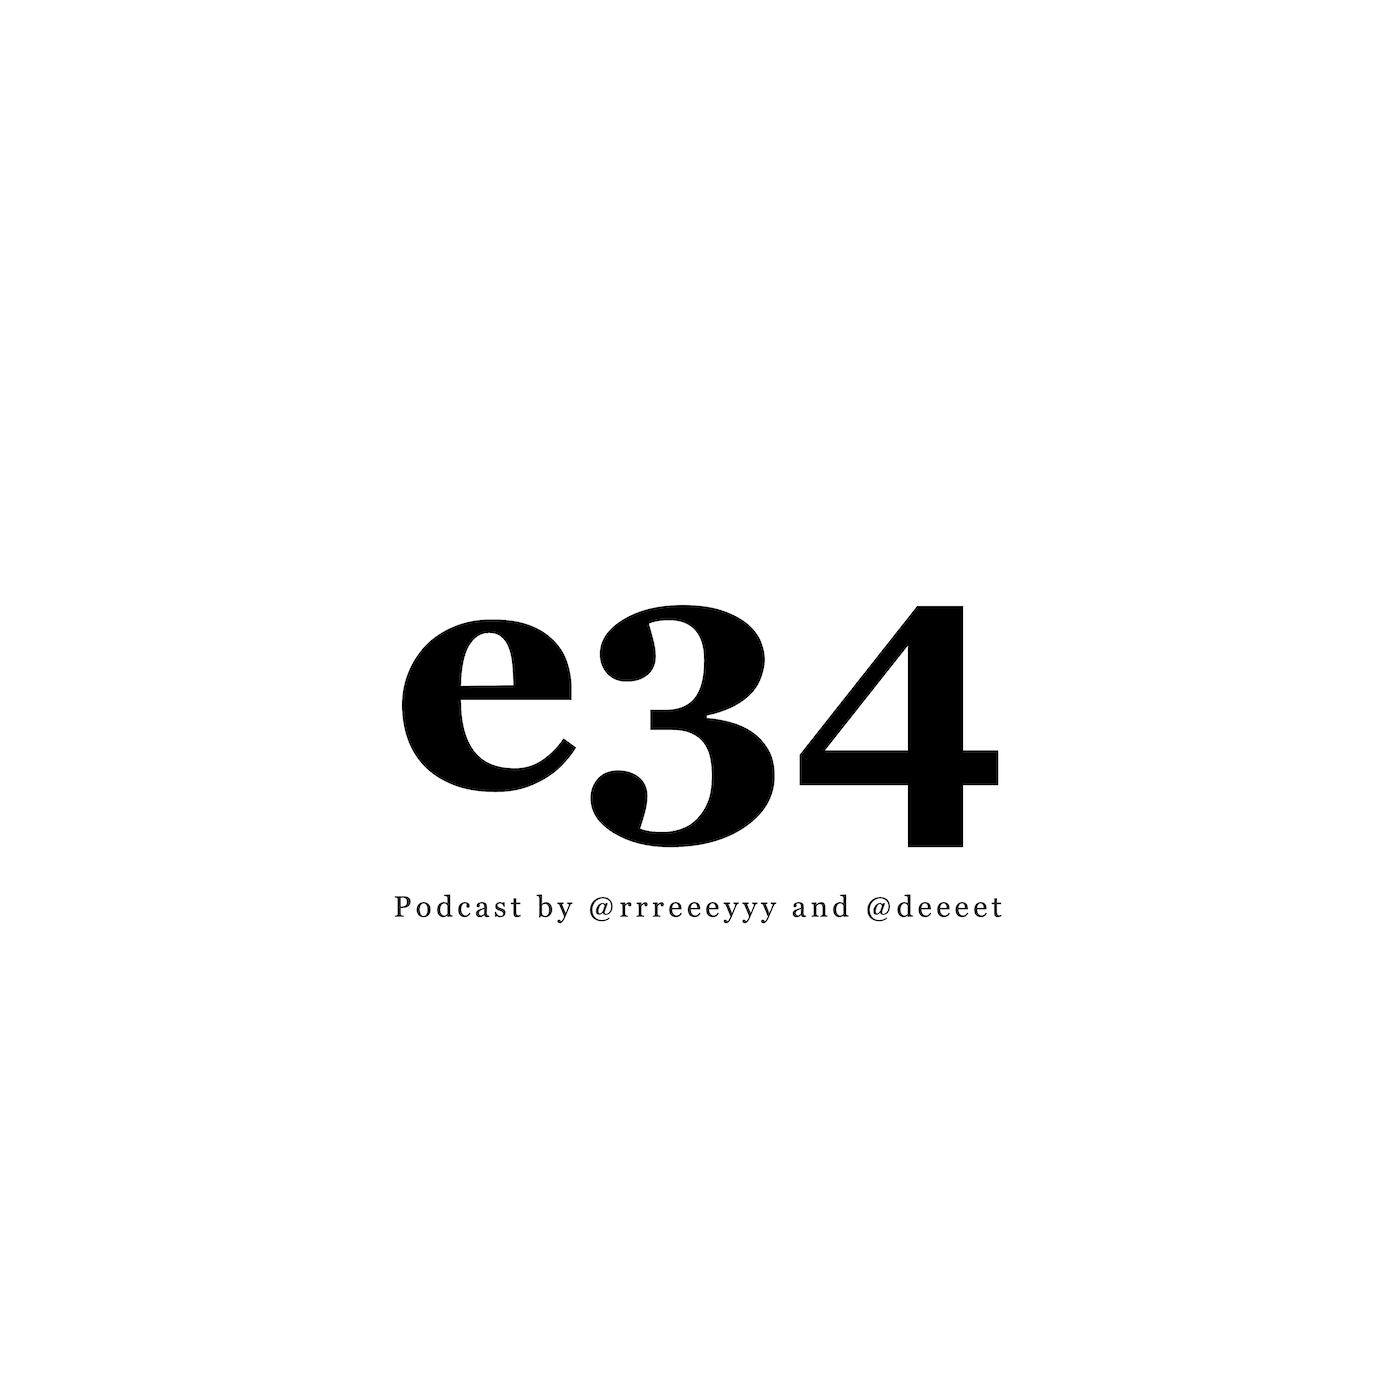 A podcast hosted by @deeeet and @rrreeeyyy. We talk about infrastructure, SRE, and platform engineering. Please reach us on Twitter at @e34fm or by email at hello@e34.fm.